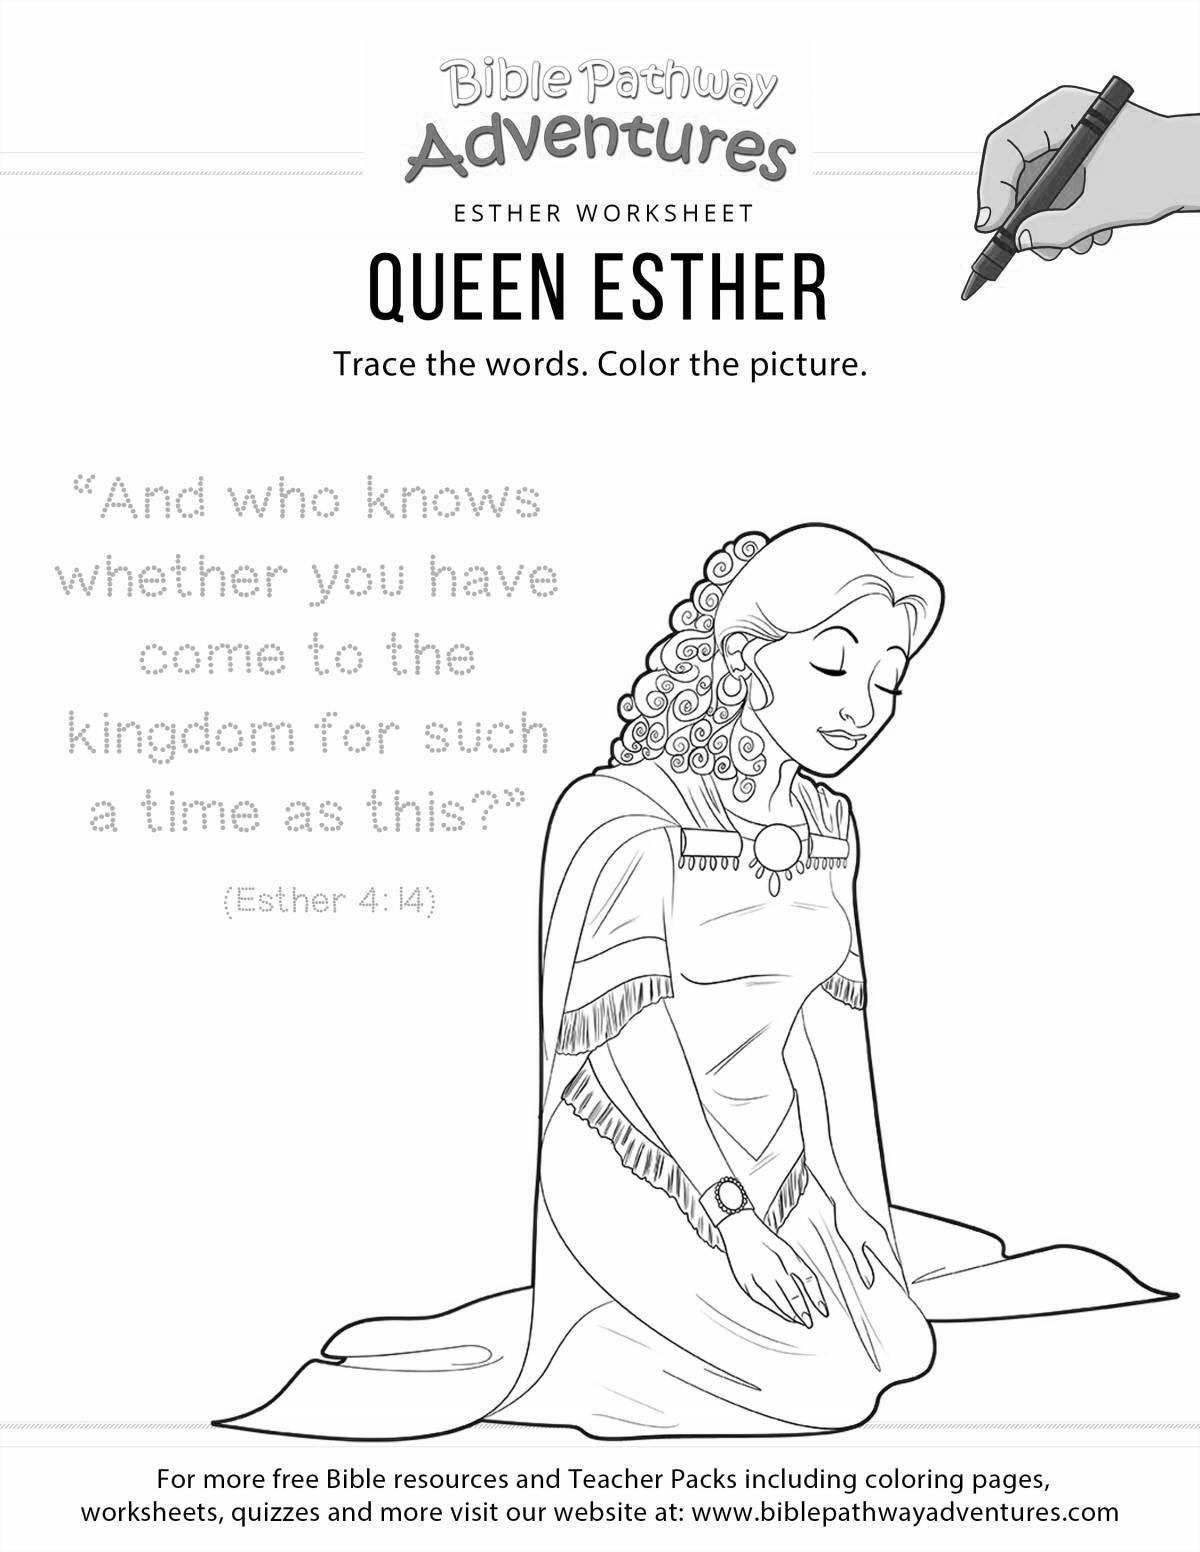 Esther's glowing coloring book